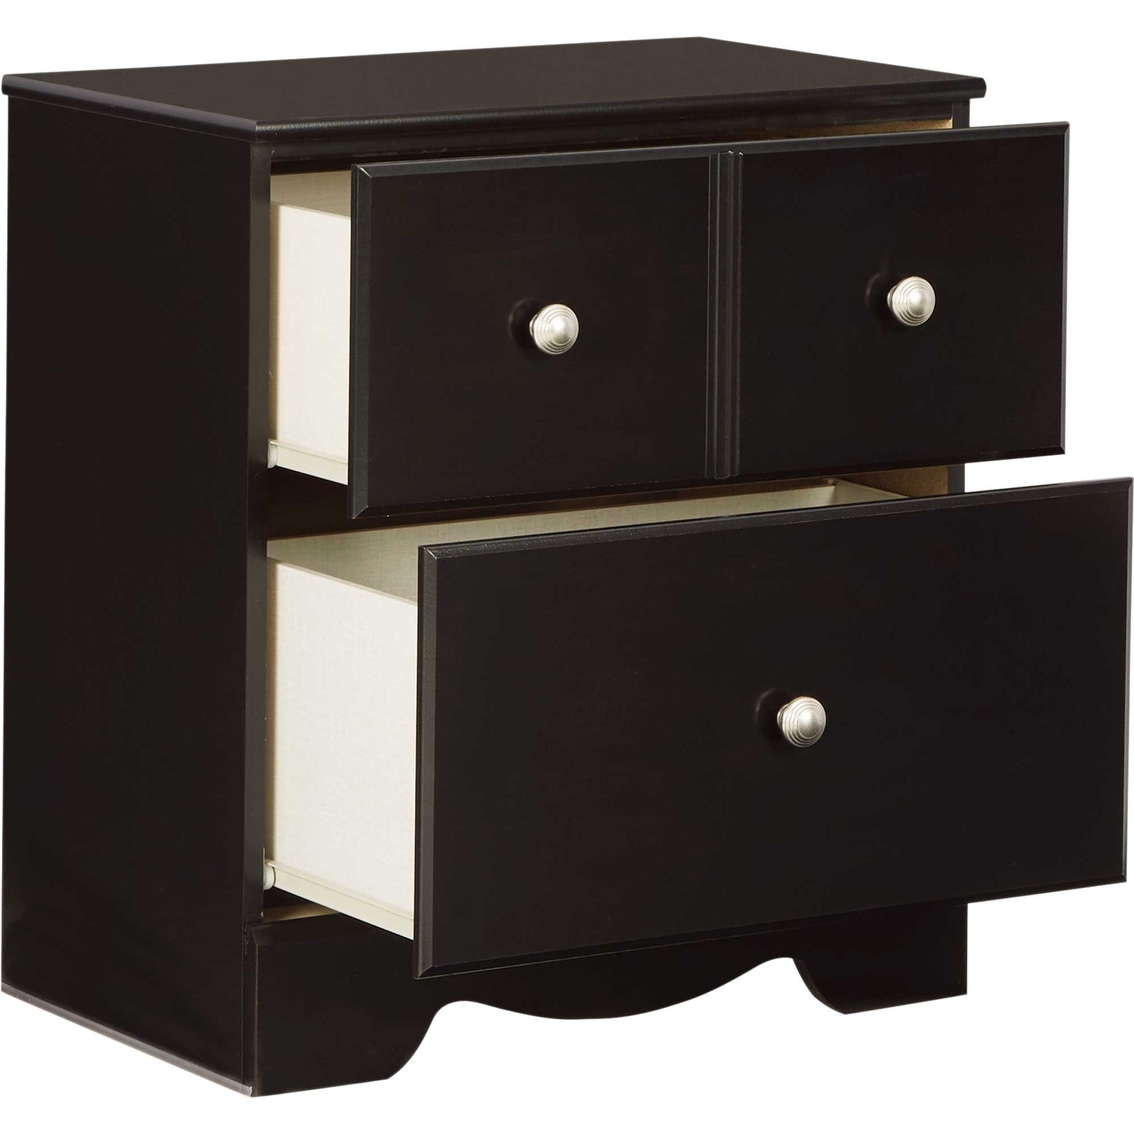 Signature Design by Ashley Mirlotown 2 Drawer Nightstand - Image 3 of 7